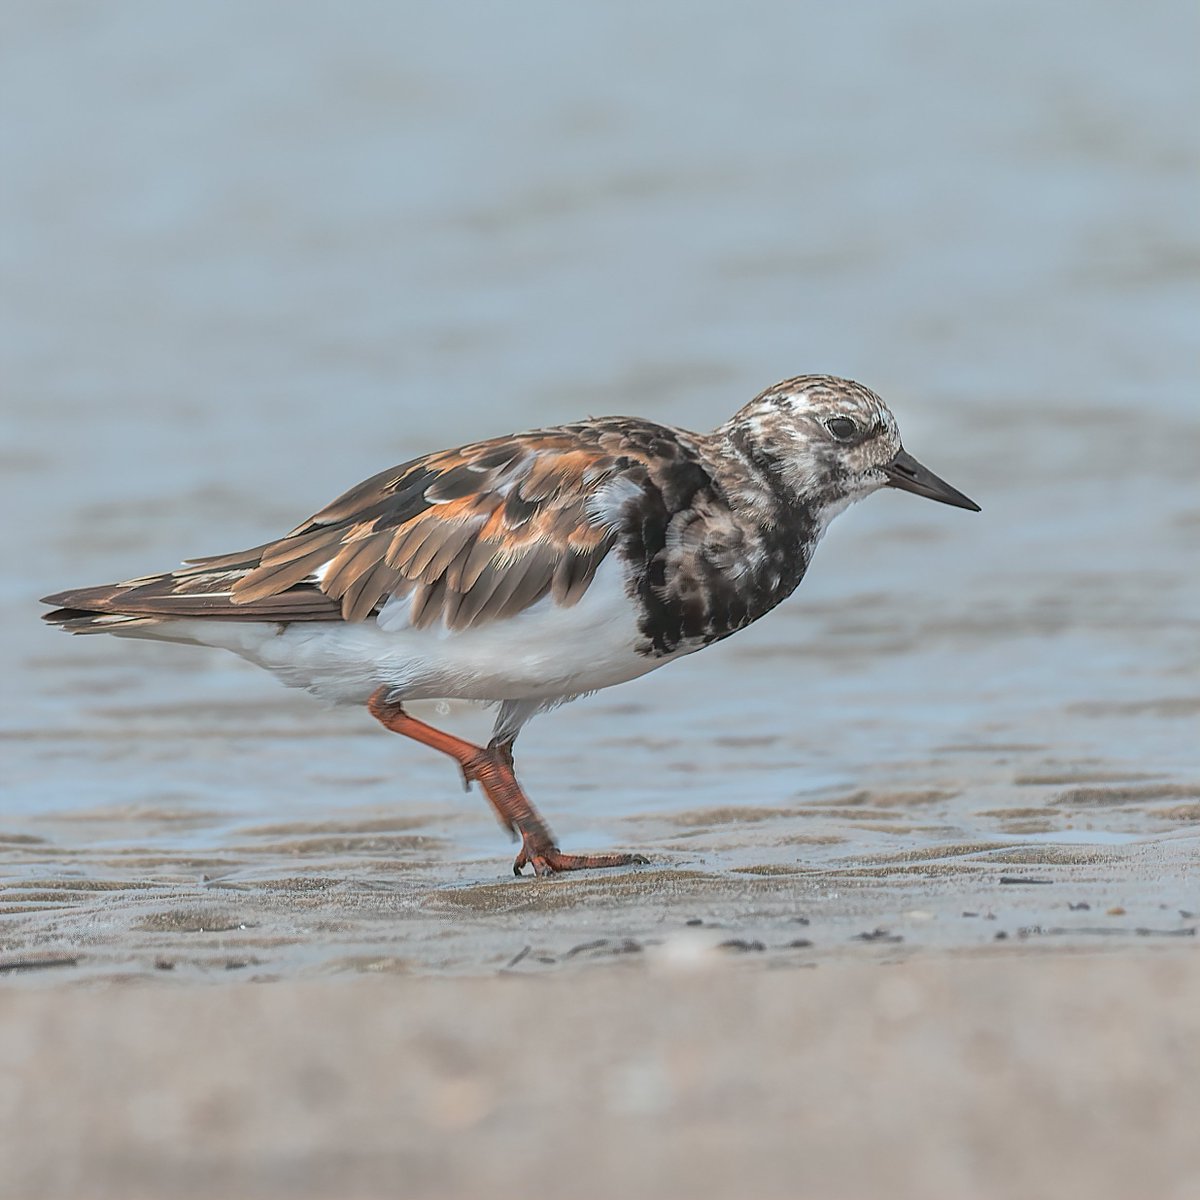 How about sharing a 'Bird in a Mud' today?

A long distance migratory shorebird, frequently seen flipping stones in search of small creatures.

Ruddy Turnstone

#IndiAves #ThePhotoHour #BirdInAMud